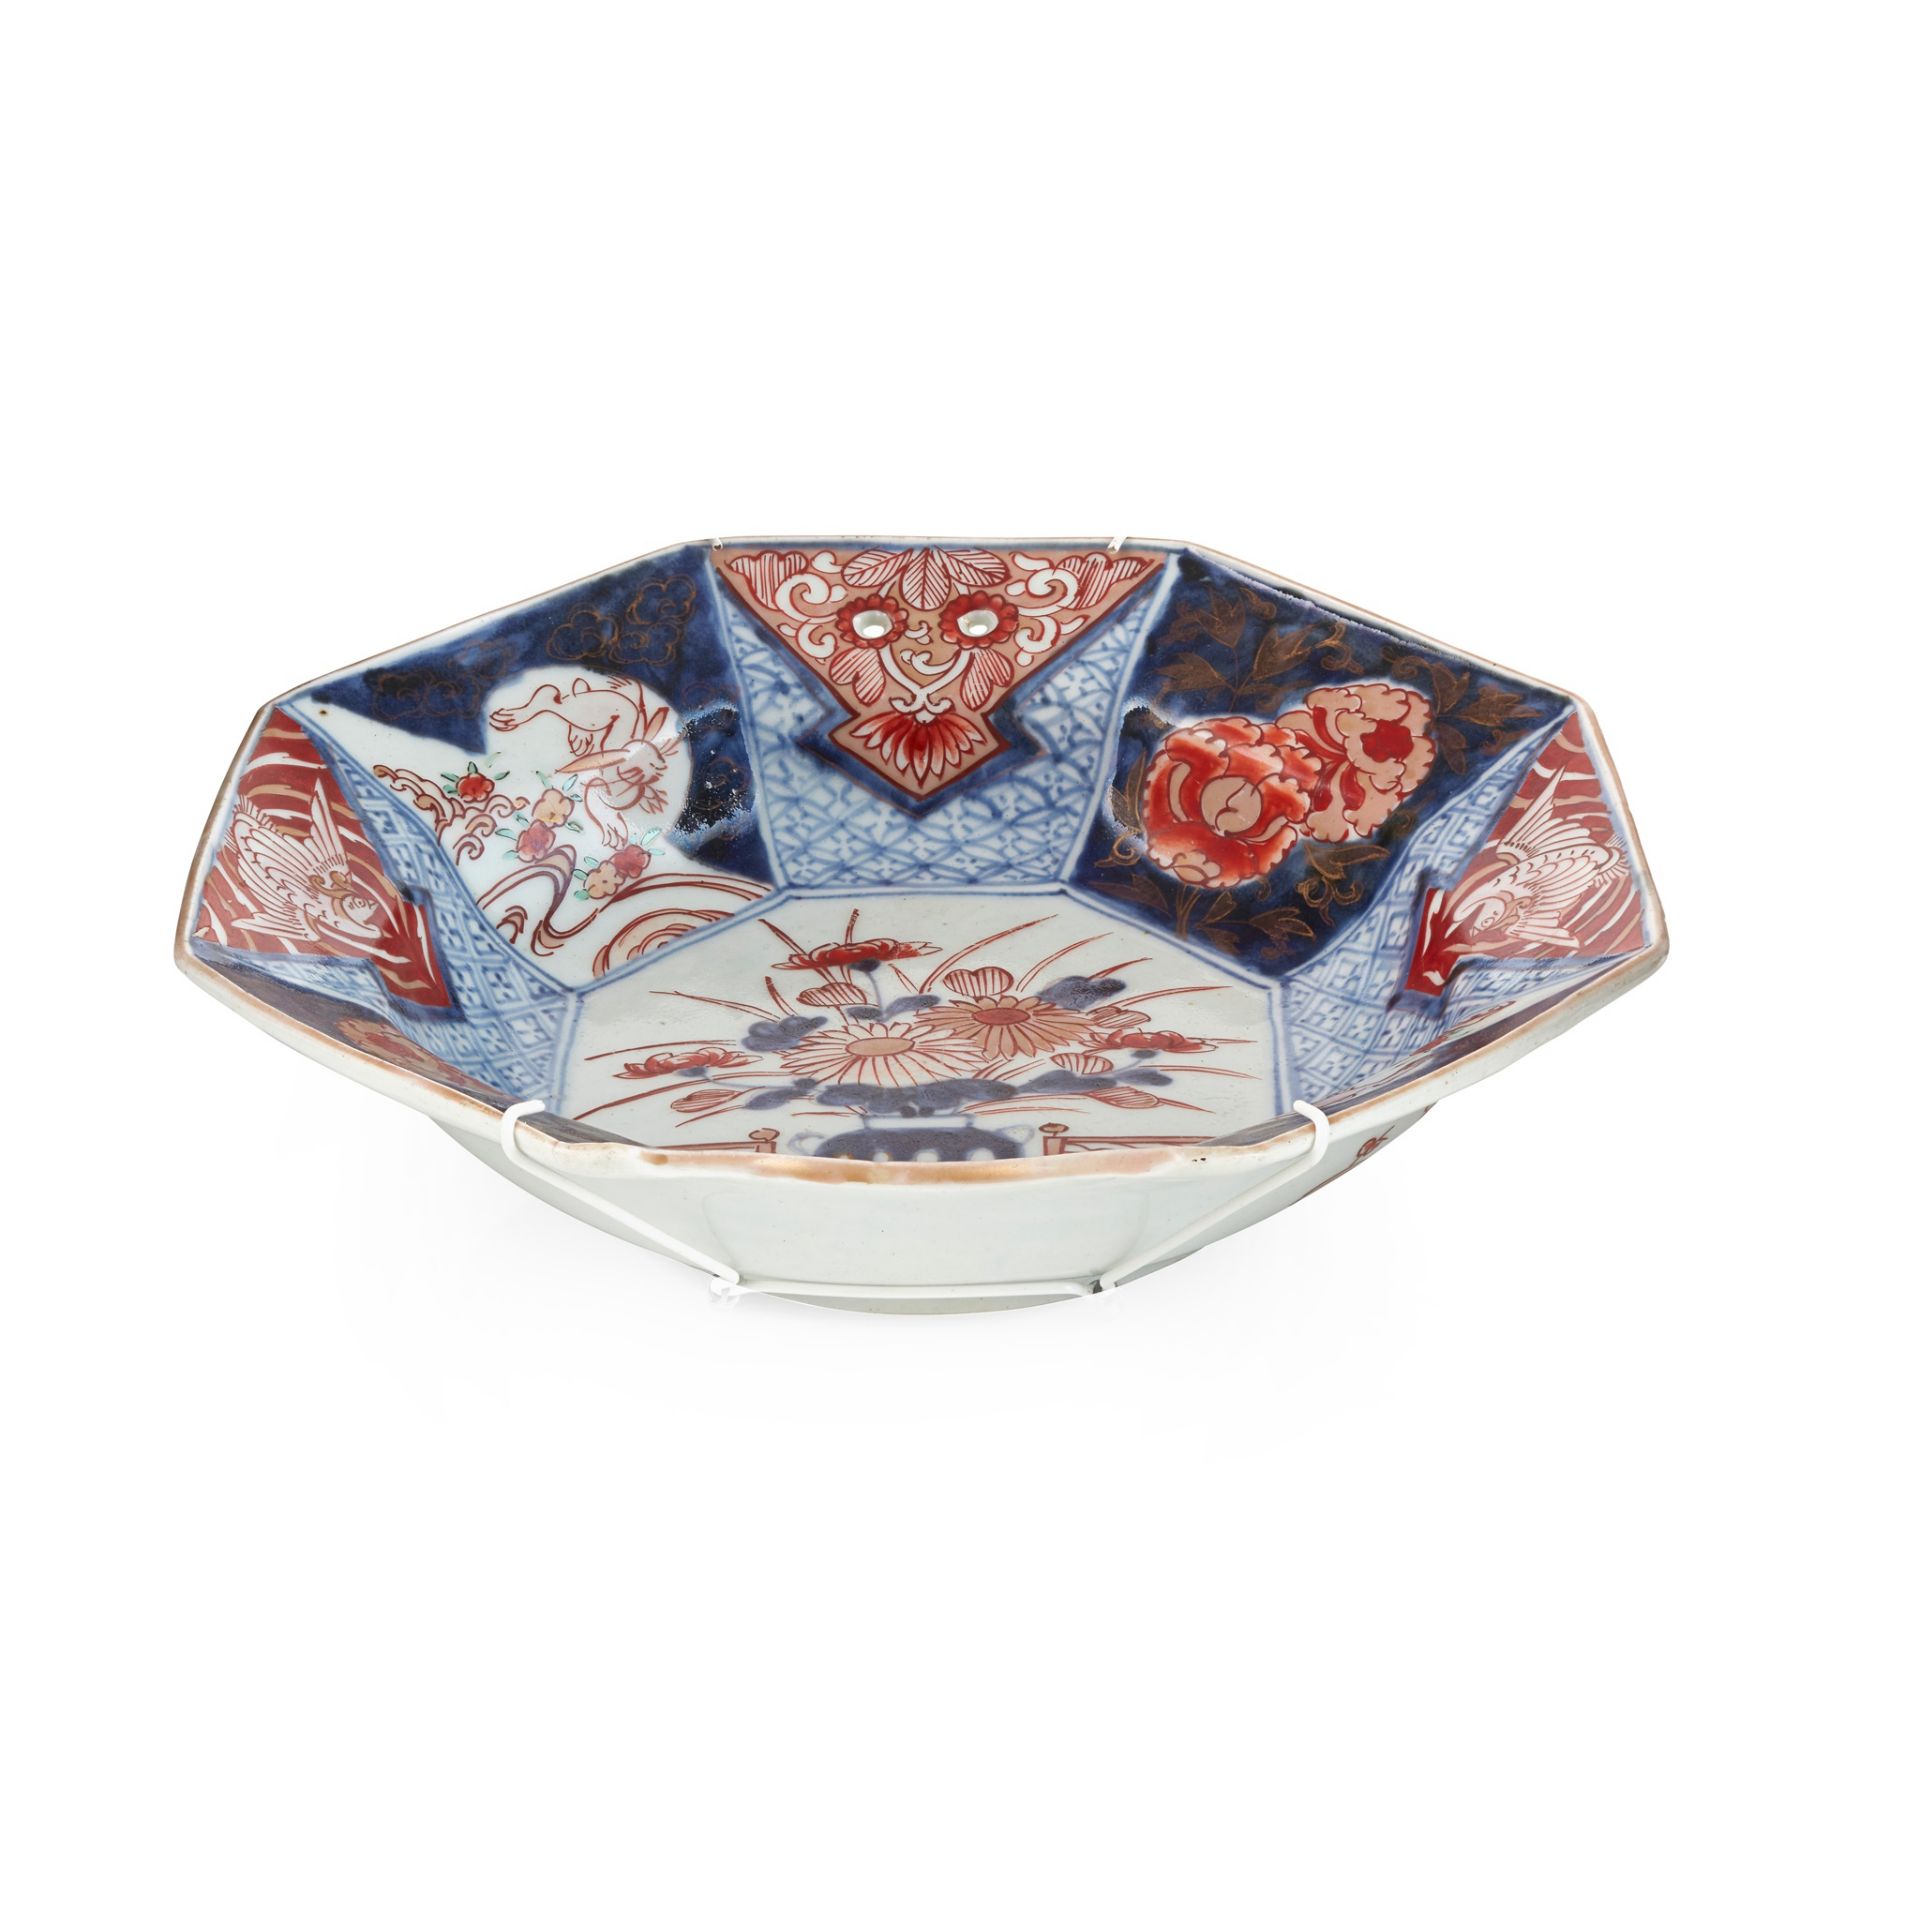 (A PRIVATE SCOTTISH COLLECTION) GROUP OF THREE IMARI WARES MEIJI PERIOD - Image 3 of 3